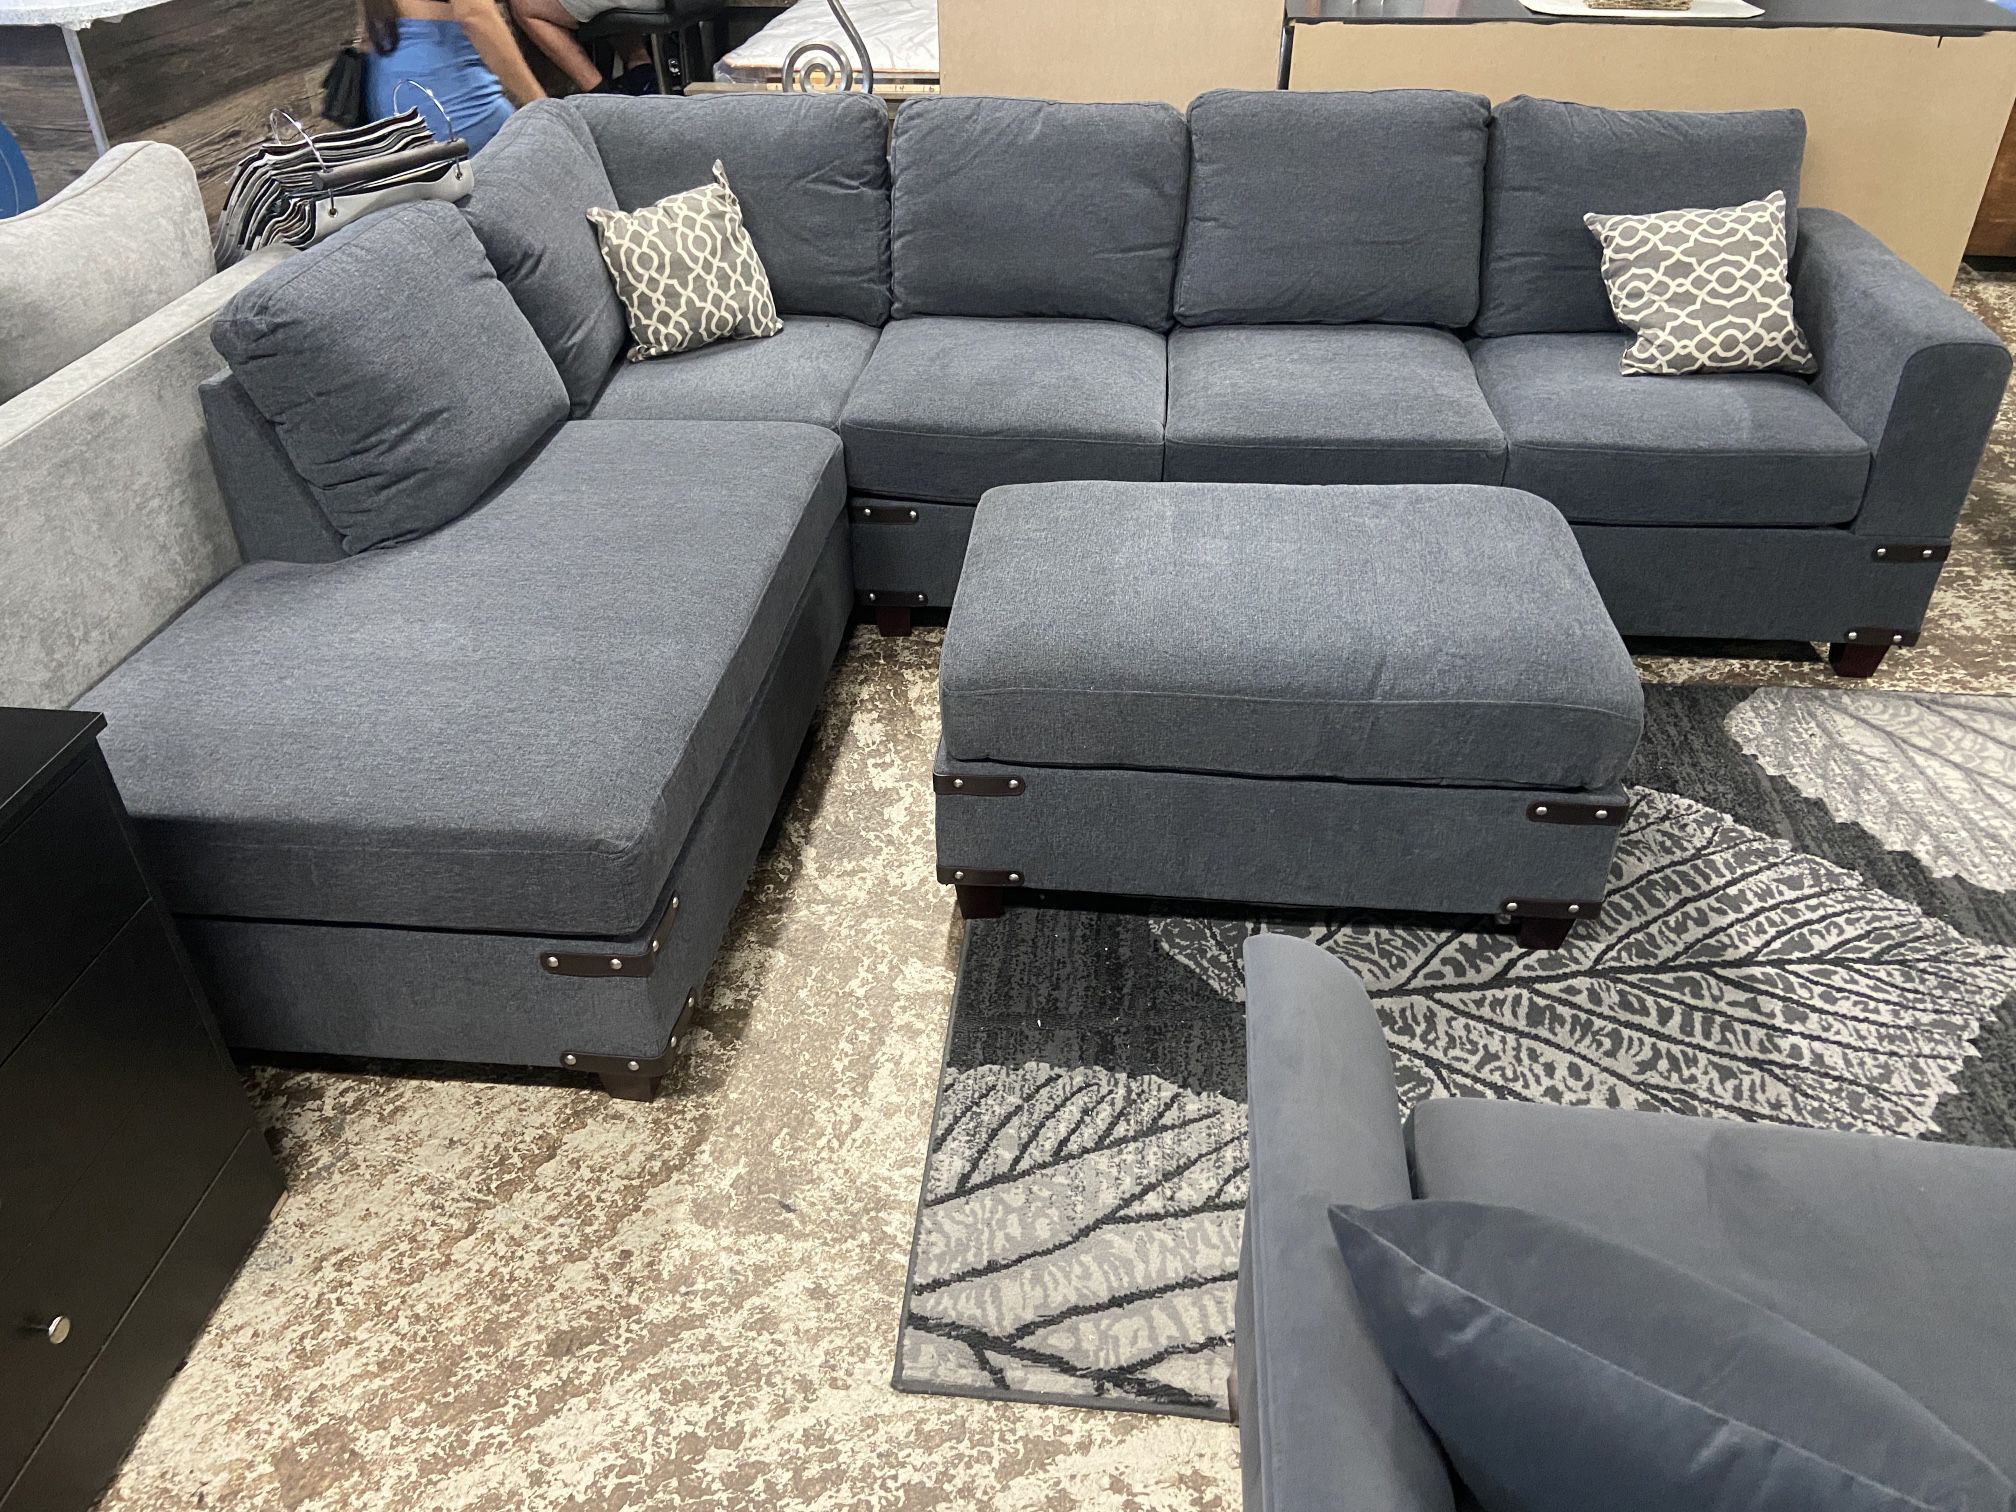 3PC Sectional Reversible Couch Set With Ottoman | Variety Of Colors Available ‼️